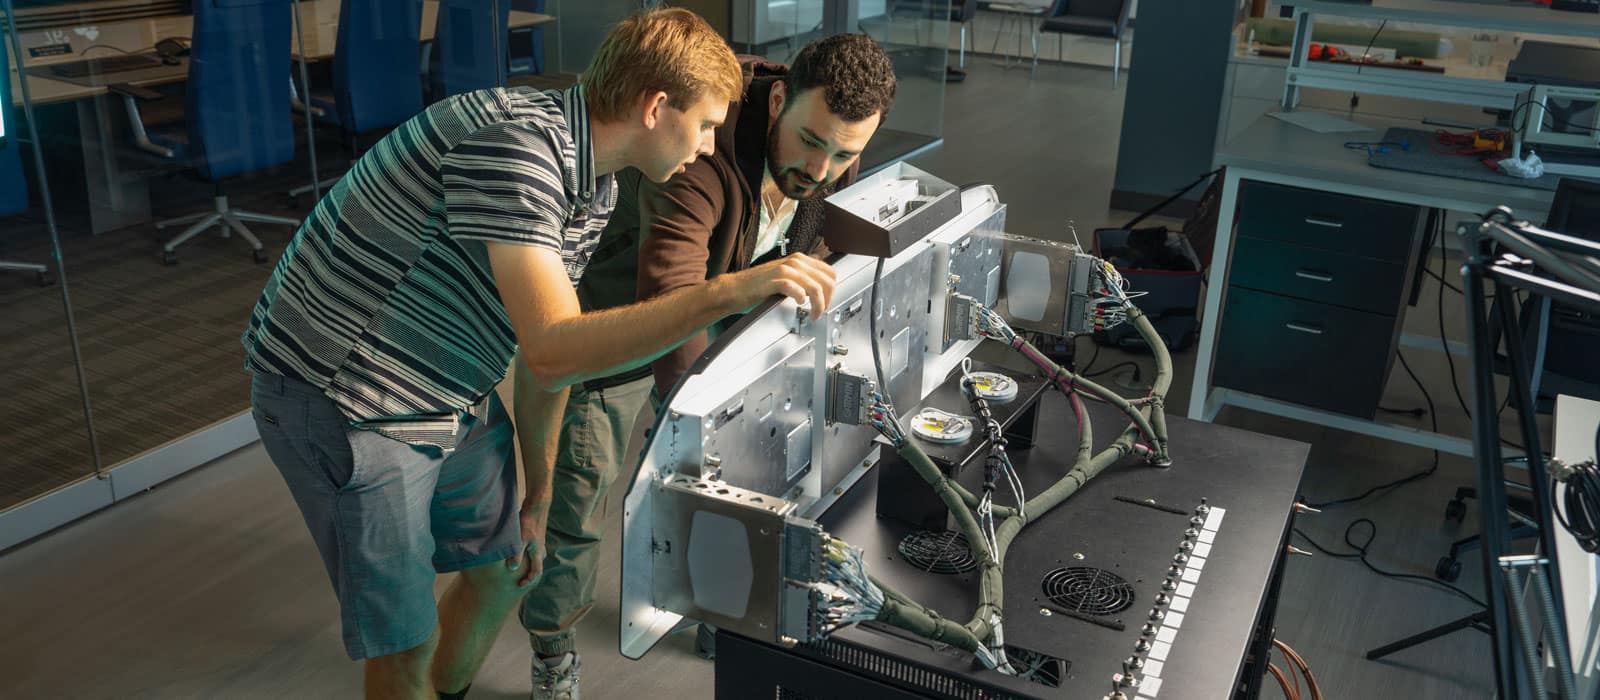 Two students work on a machine in the NEAR Lab